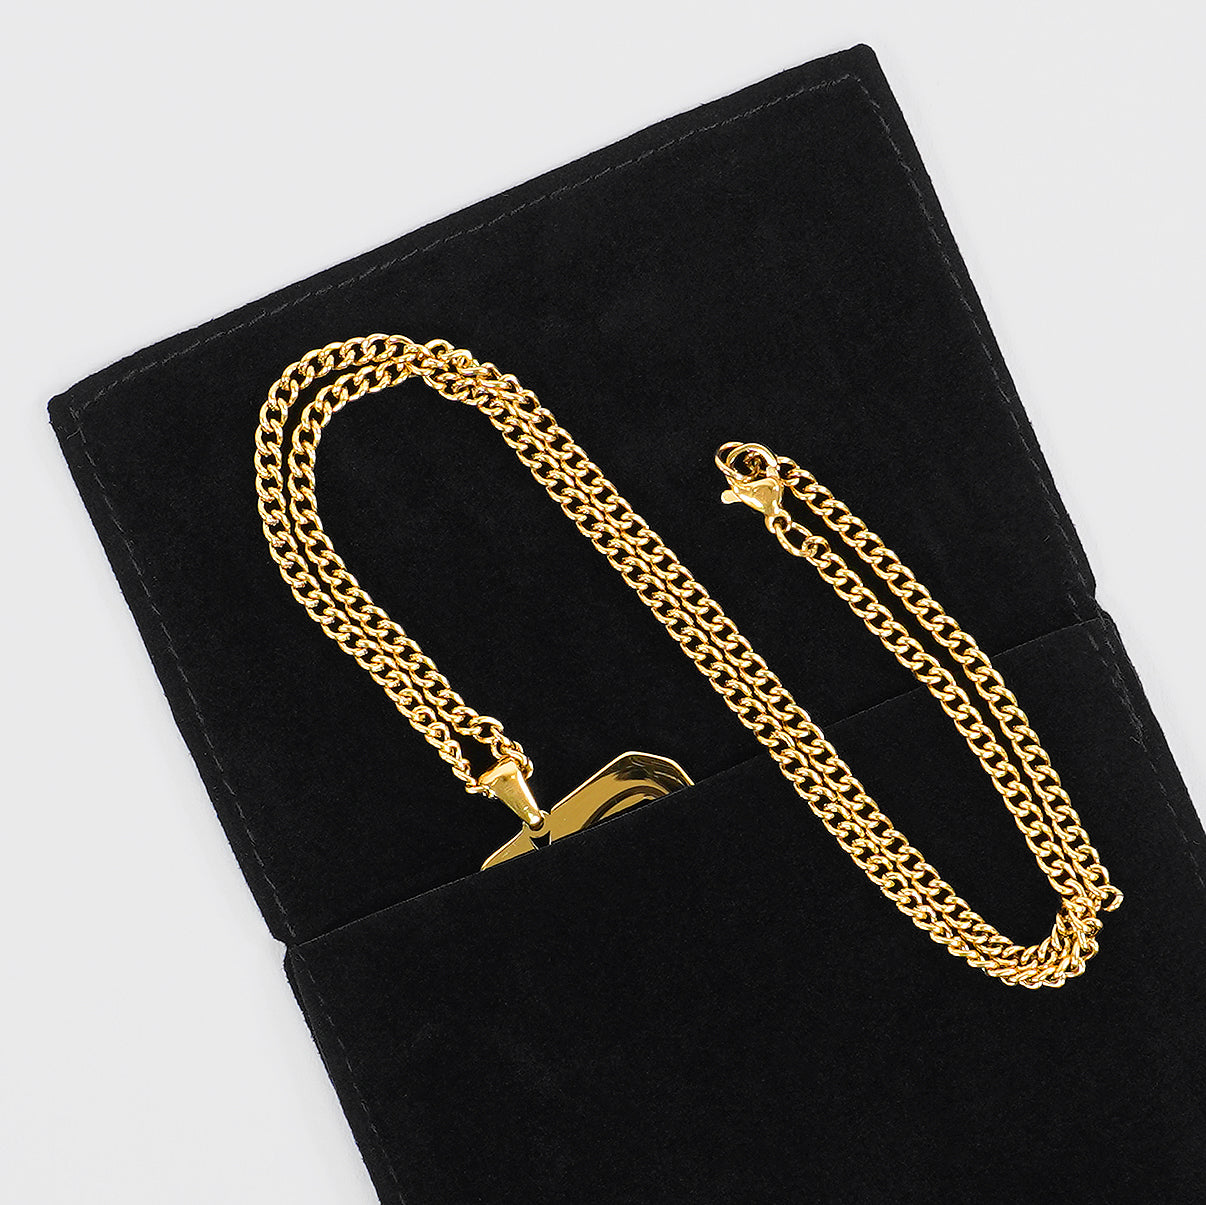 15 Number Pendant with Chain Necklace - Gold Plated Stainless Steel